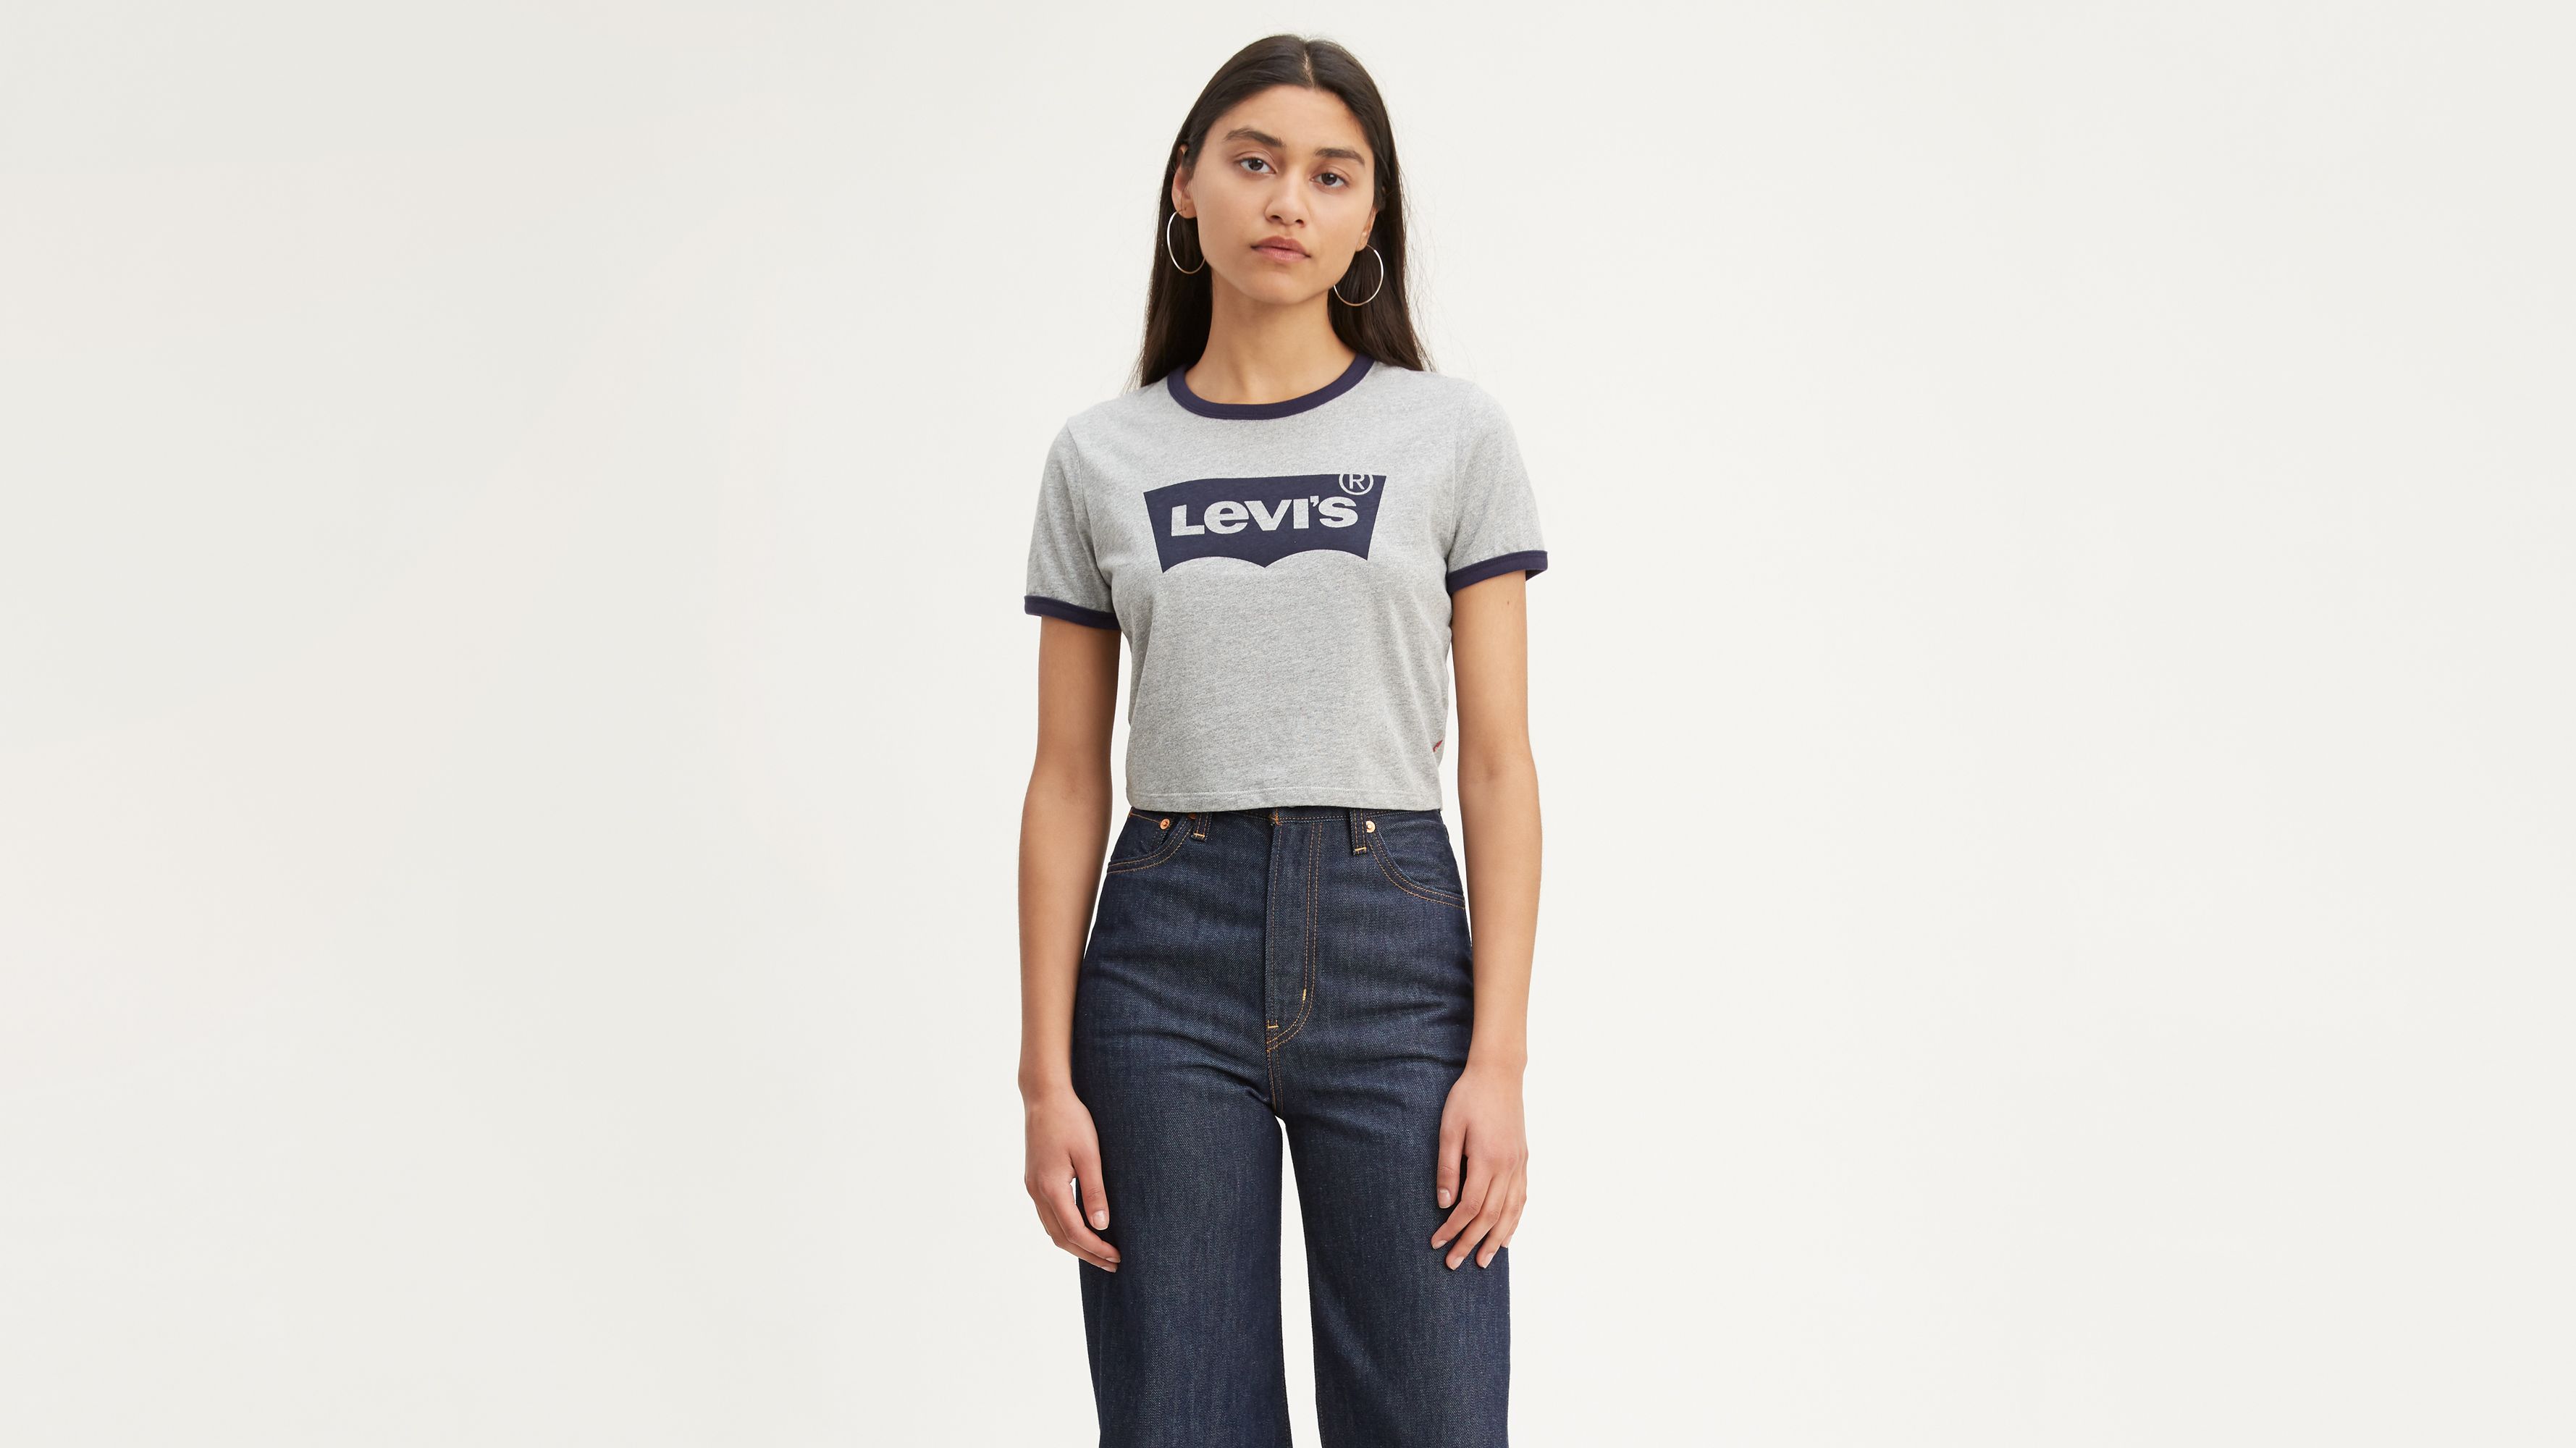 levis t shirt for baby